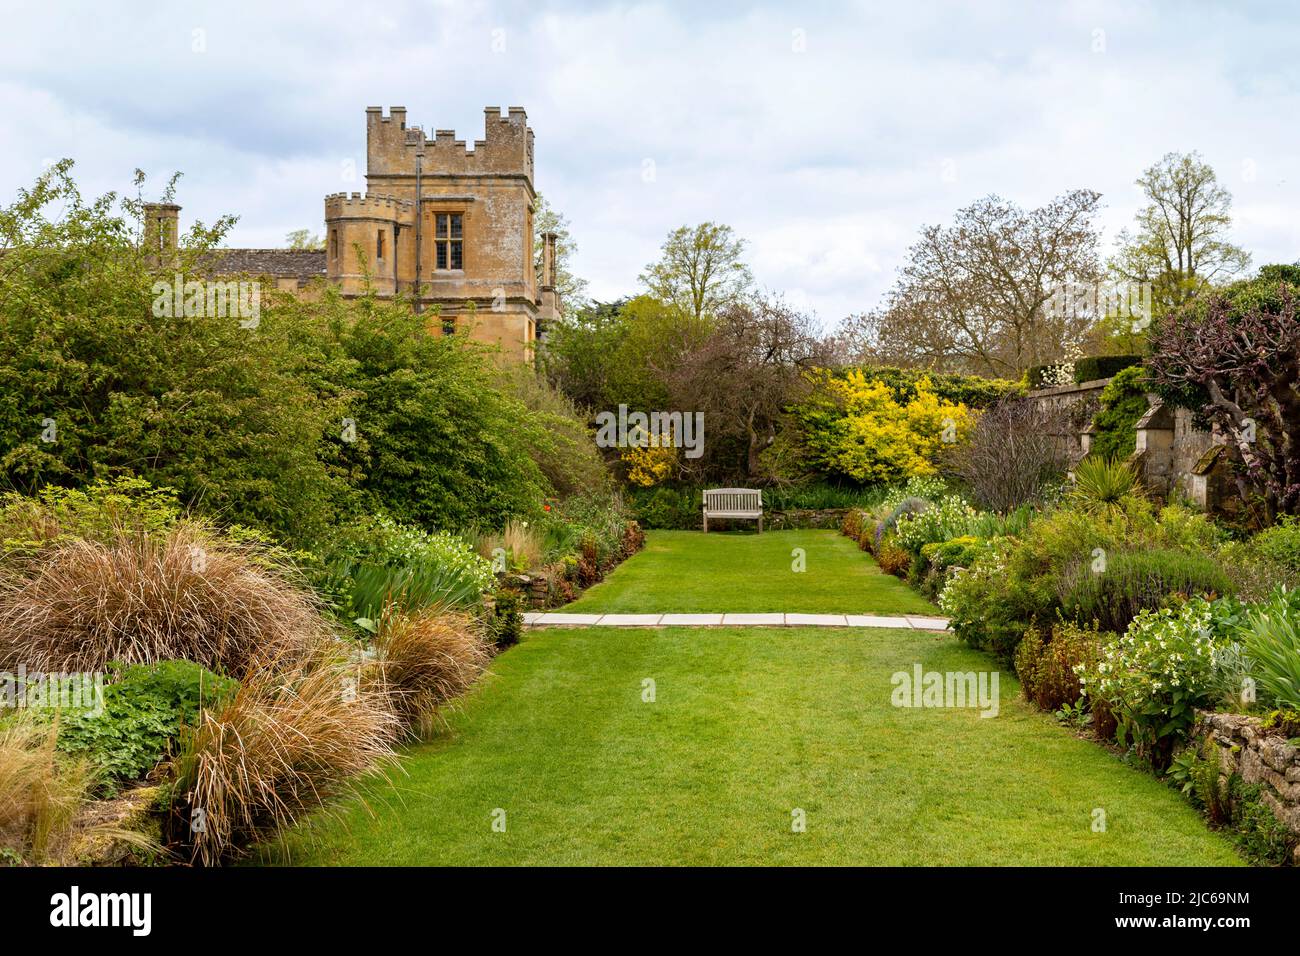 The Secret Garden of Sudeley Castle, a 15th century, Grade I listed castle, Sudeley, Gloucestershire, Cotswolds, England, Great Britain, UK Stock Photo